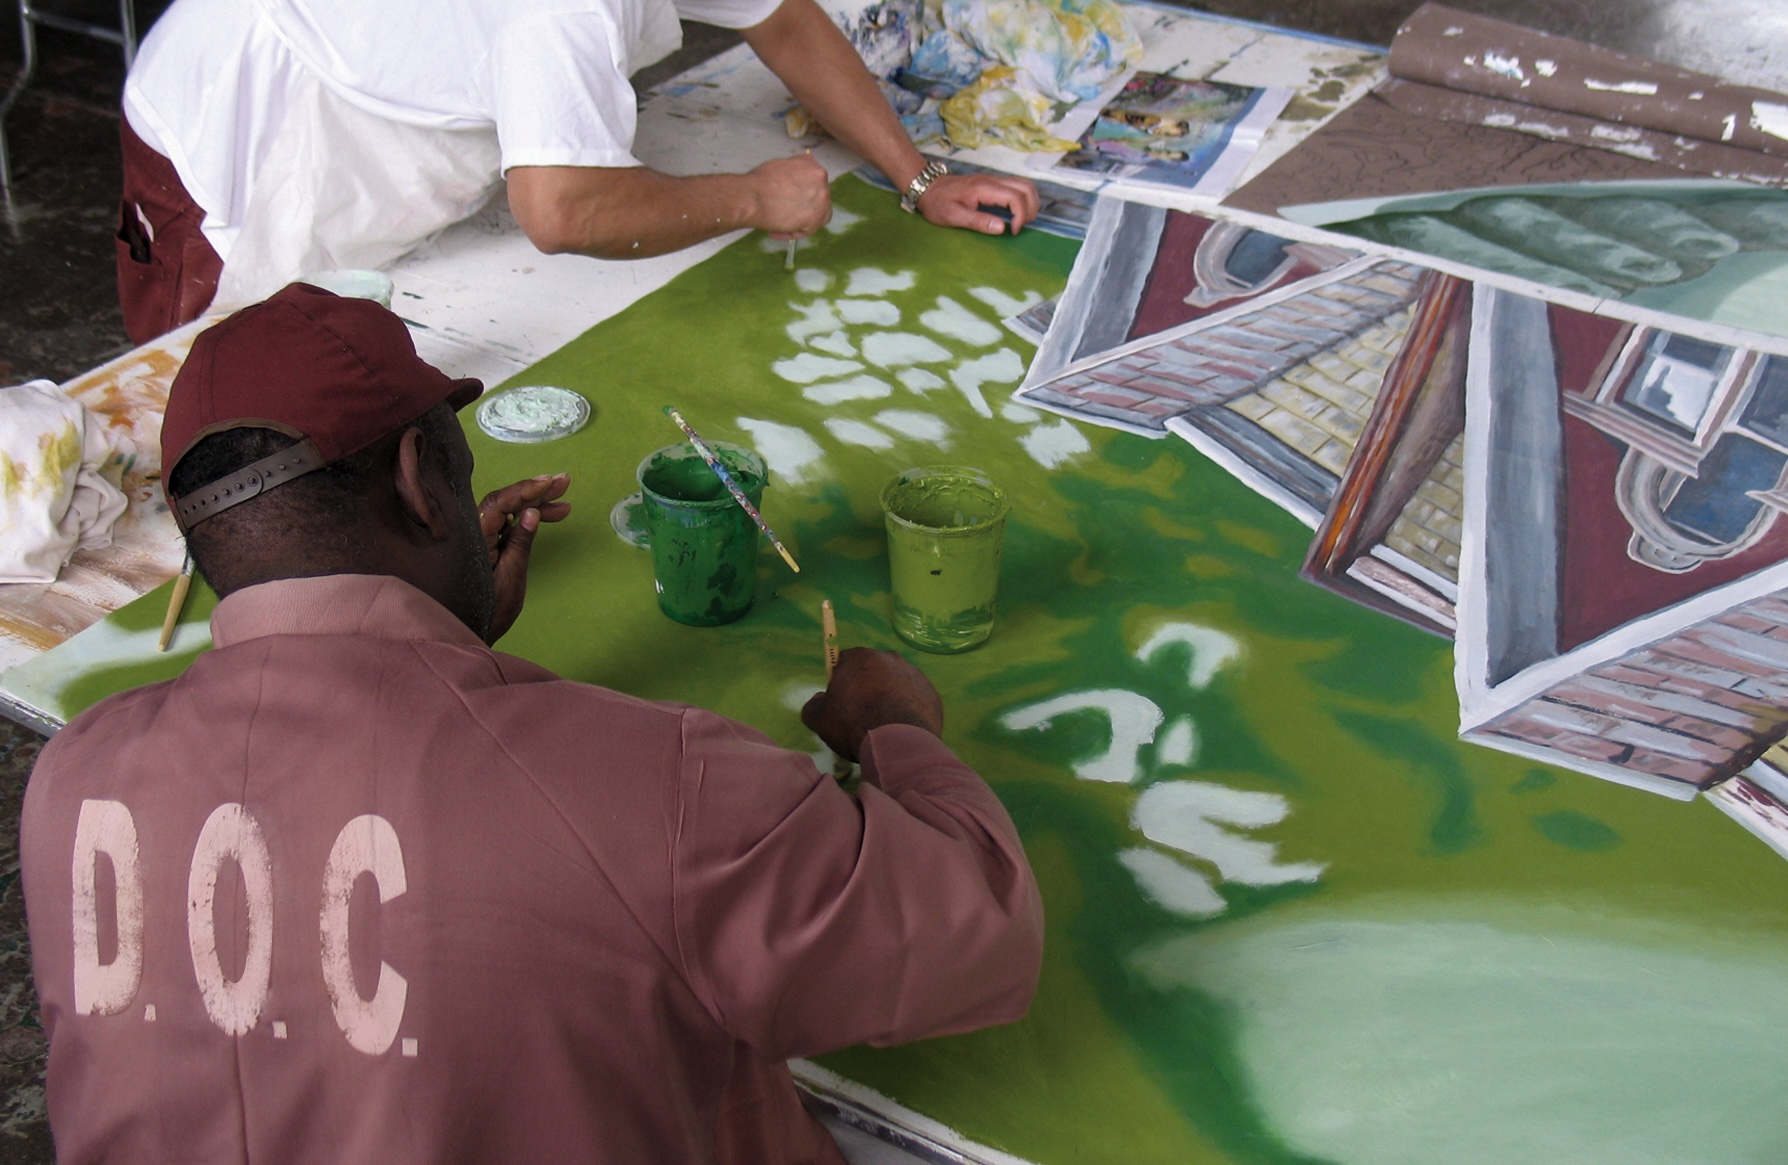 Two men in prison uniforms painting a canvas together on a table